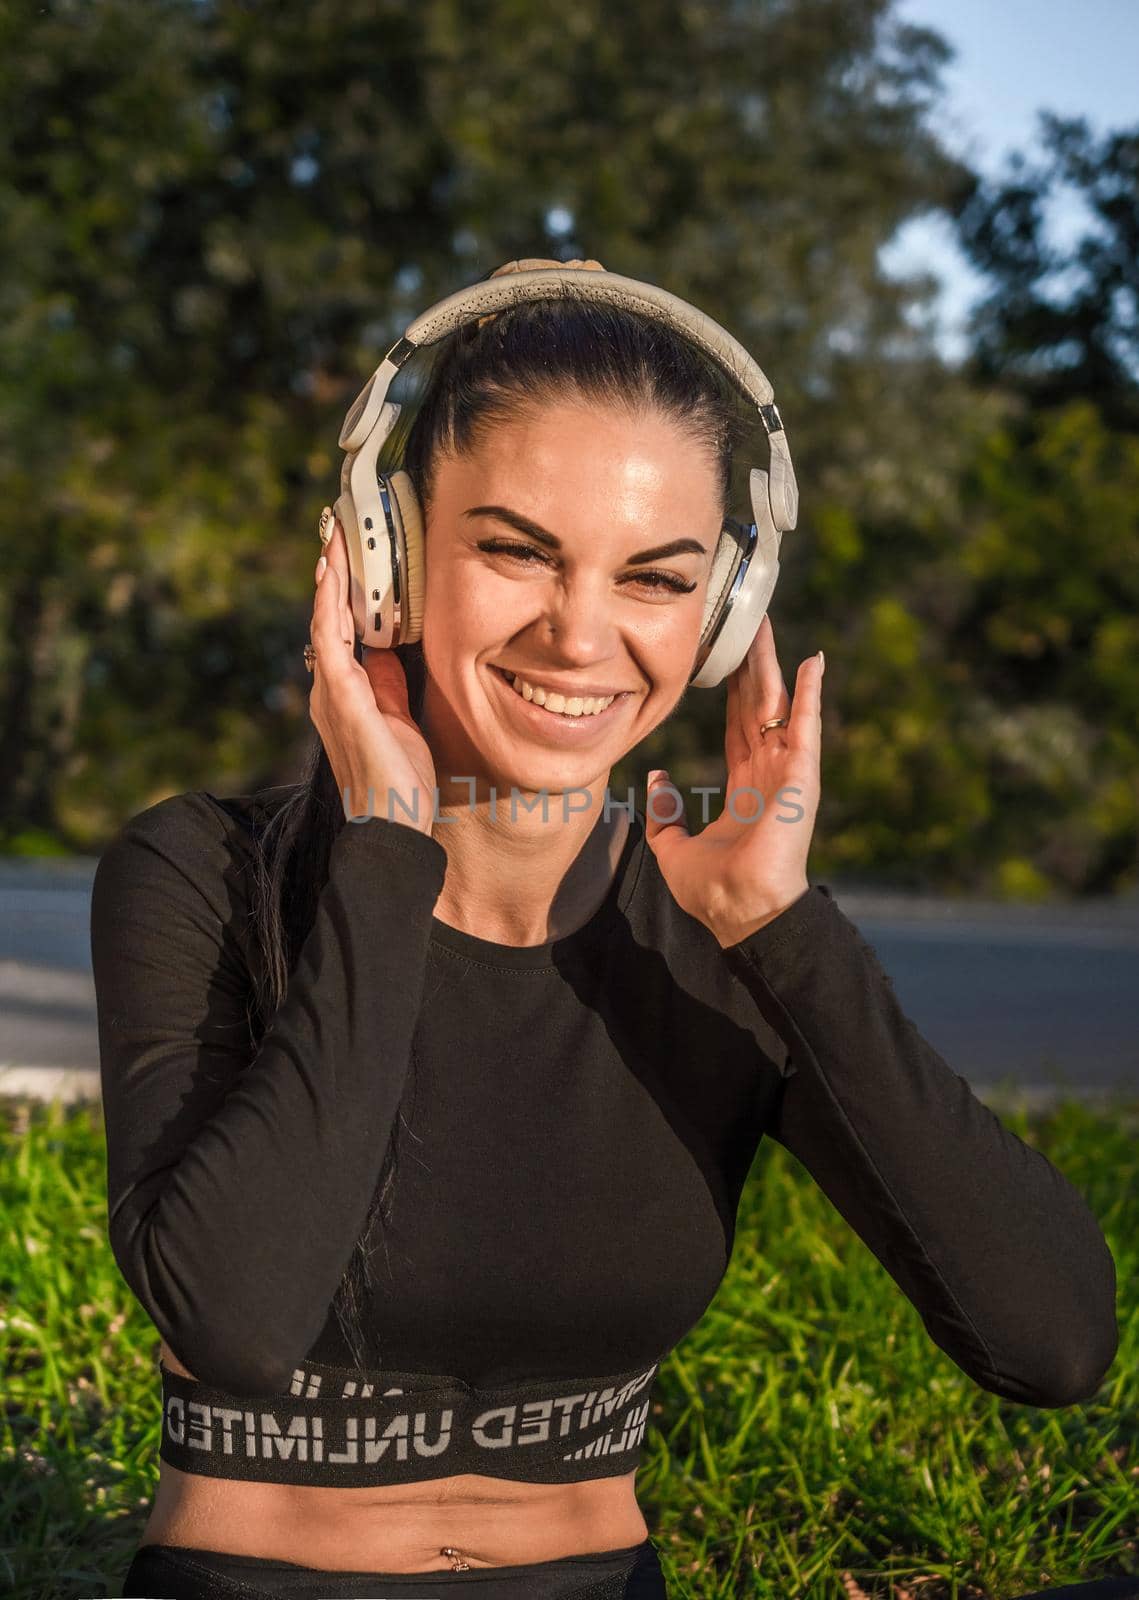 Smiling young woman with headphones outdoors enjoying music./Pretty young woman listening to music.